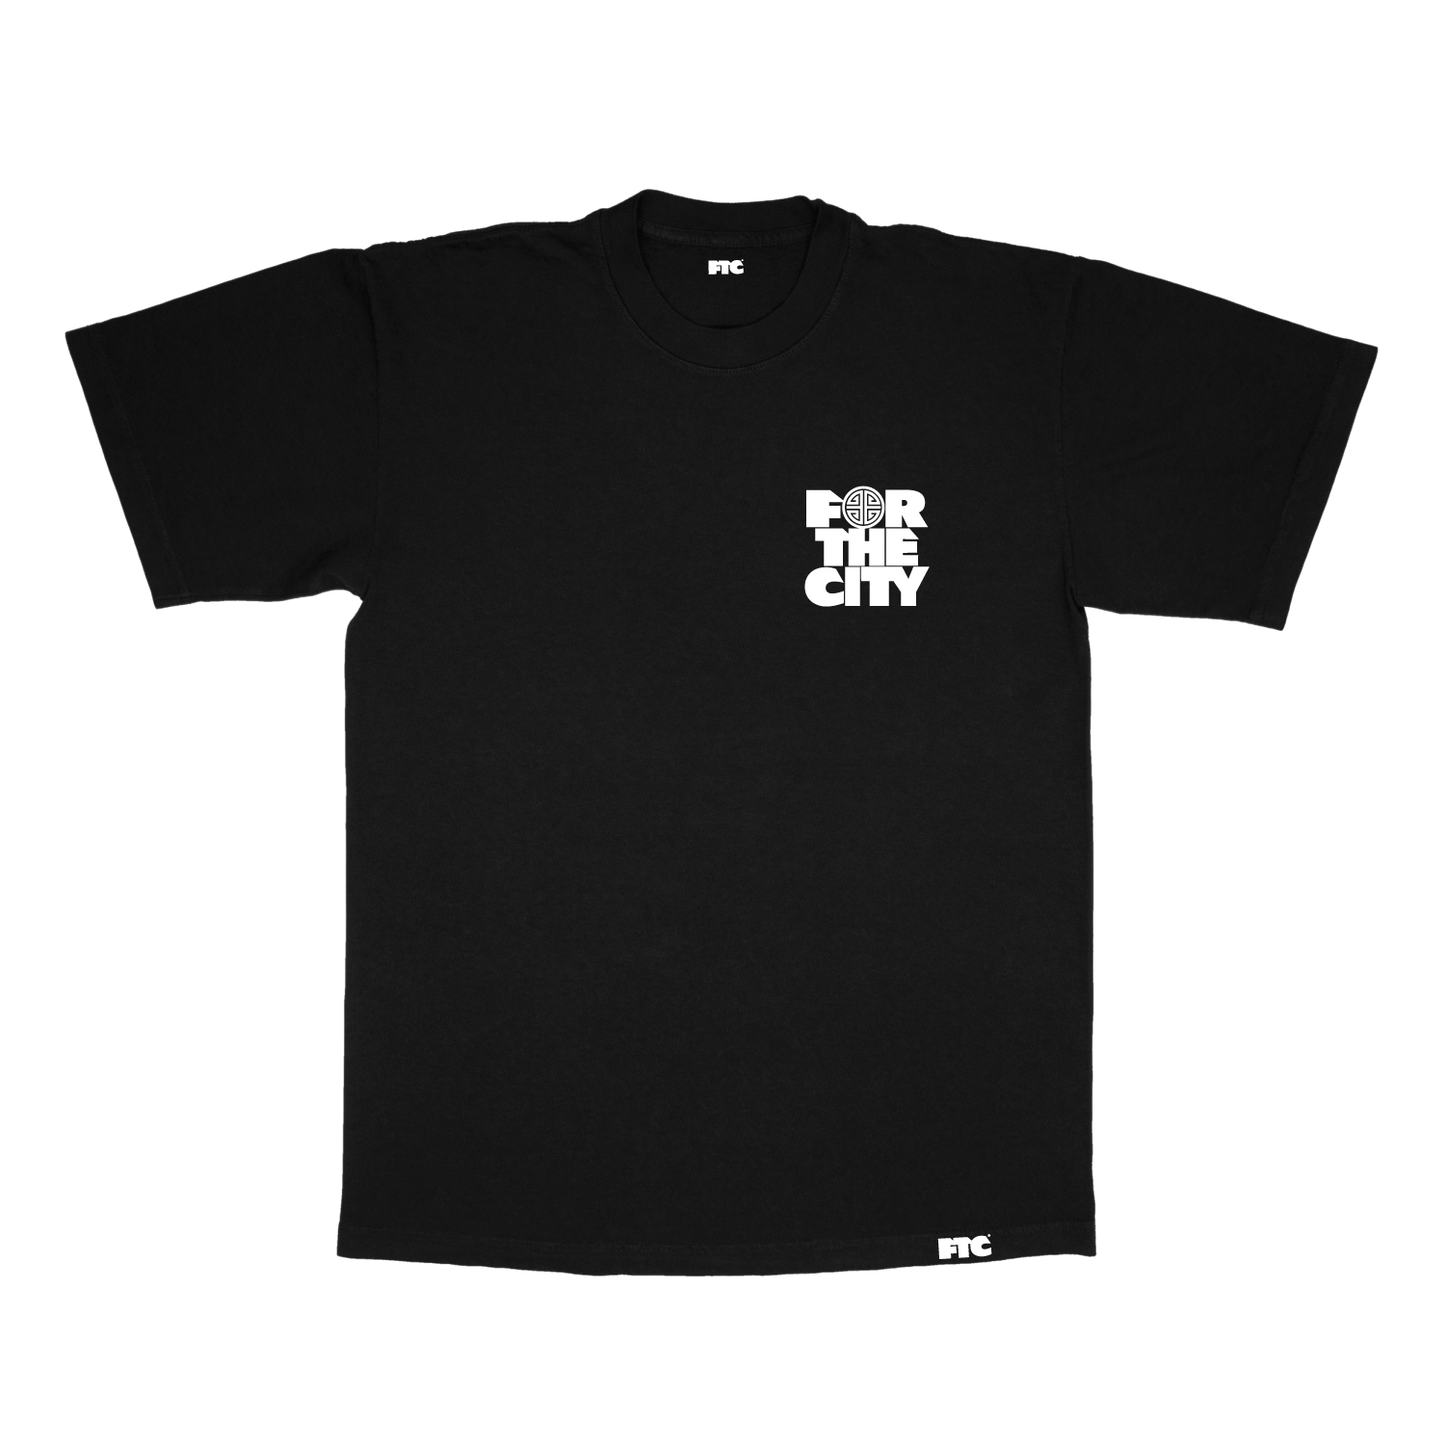 FTC x EMPIRE 415 Day Collab - Black T